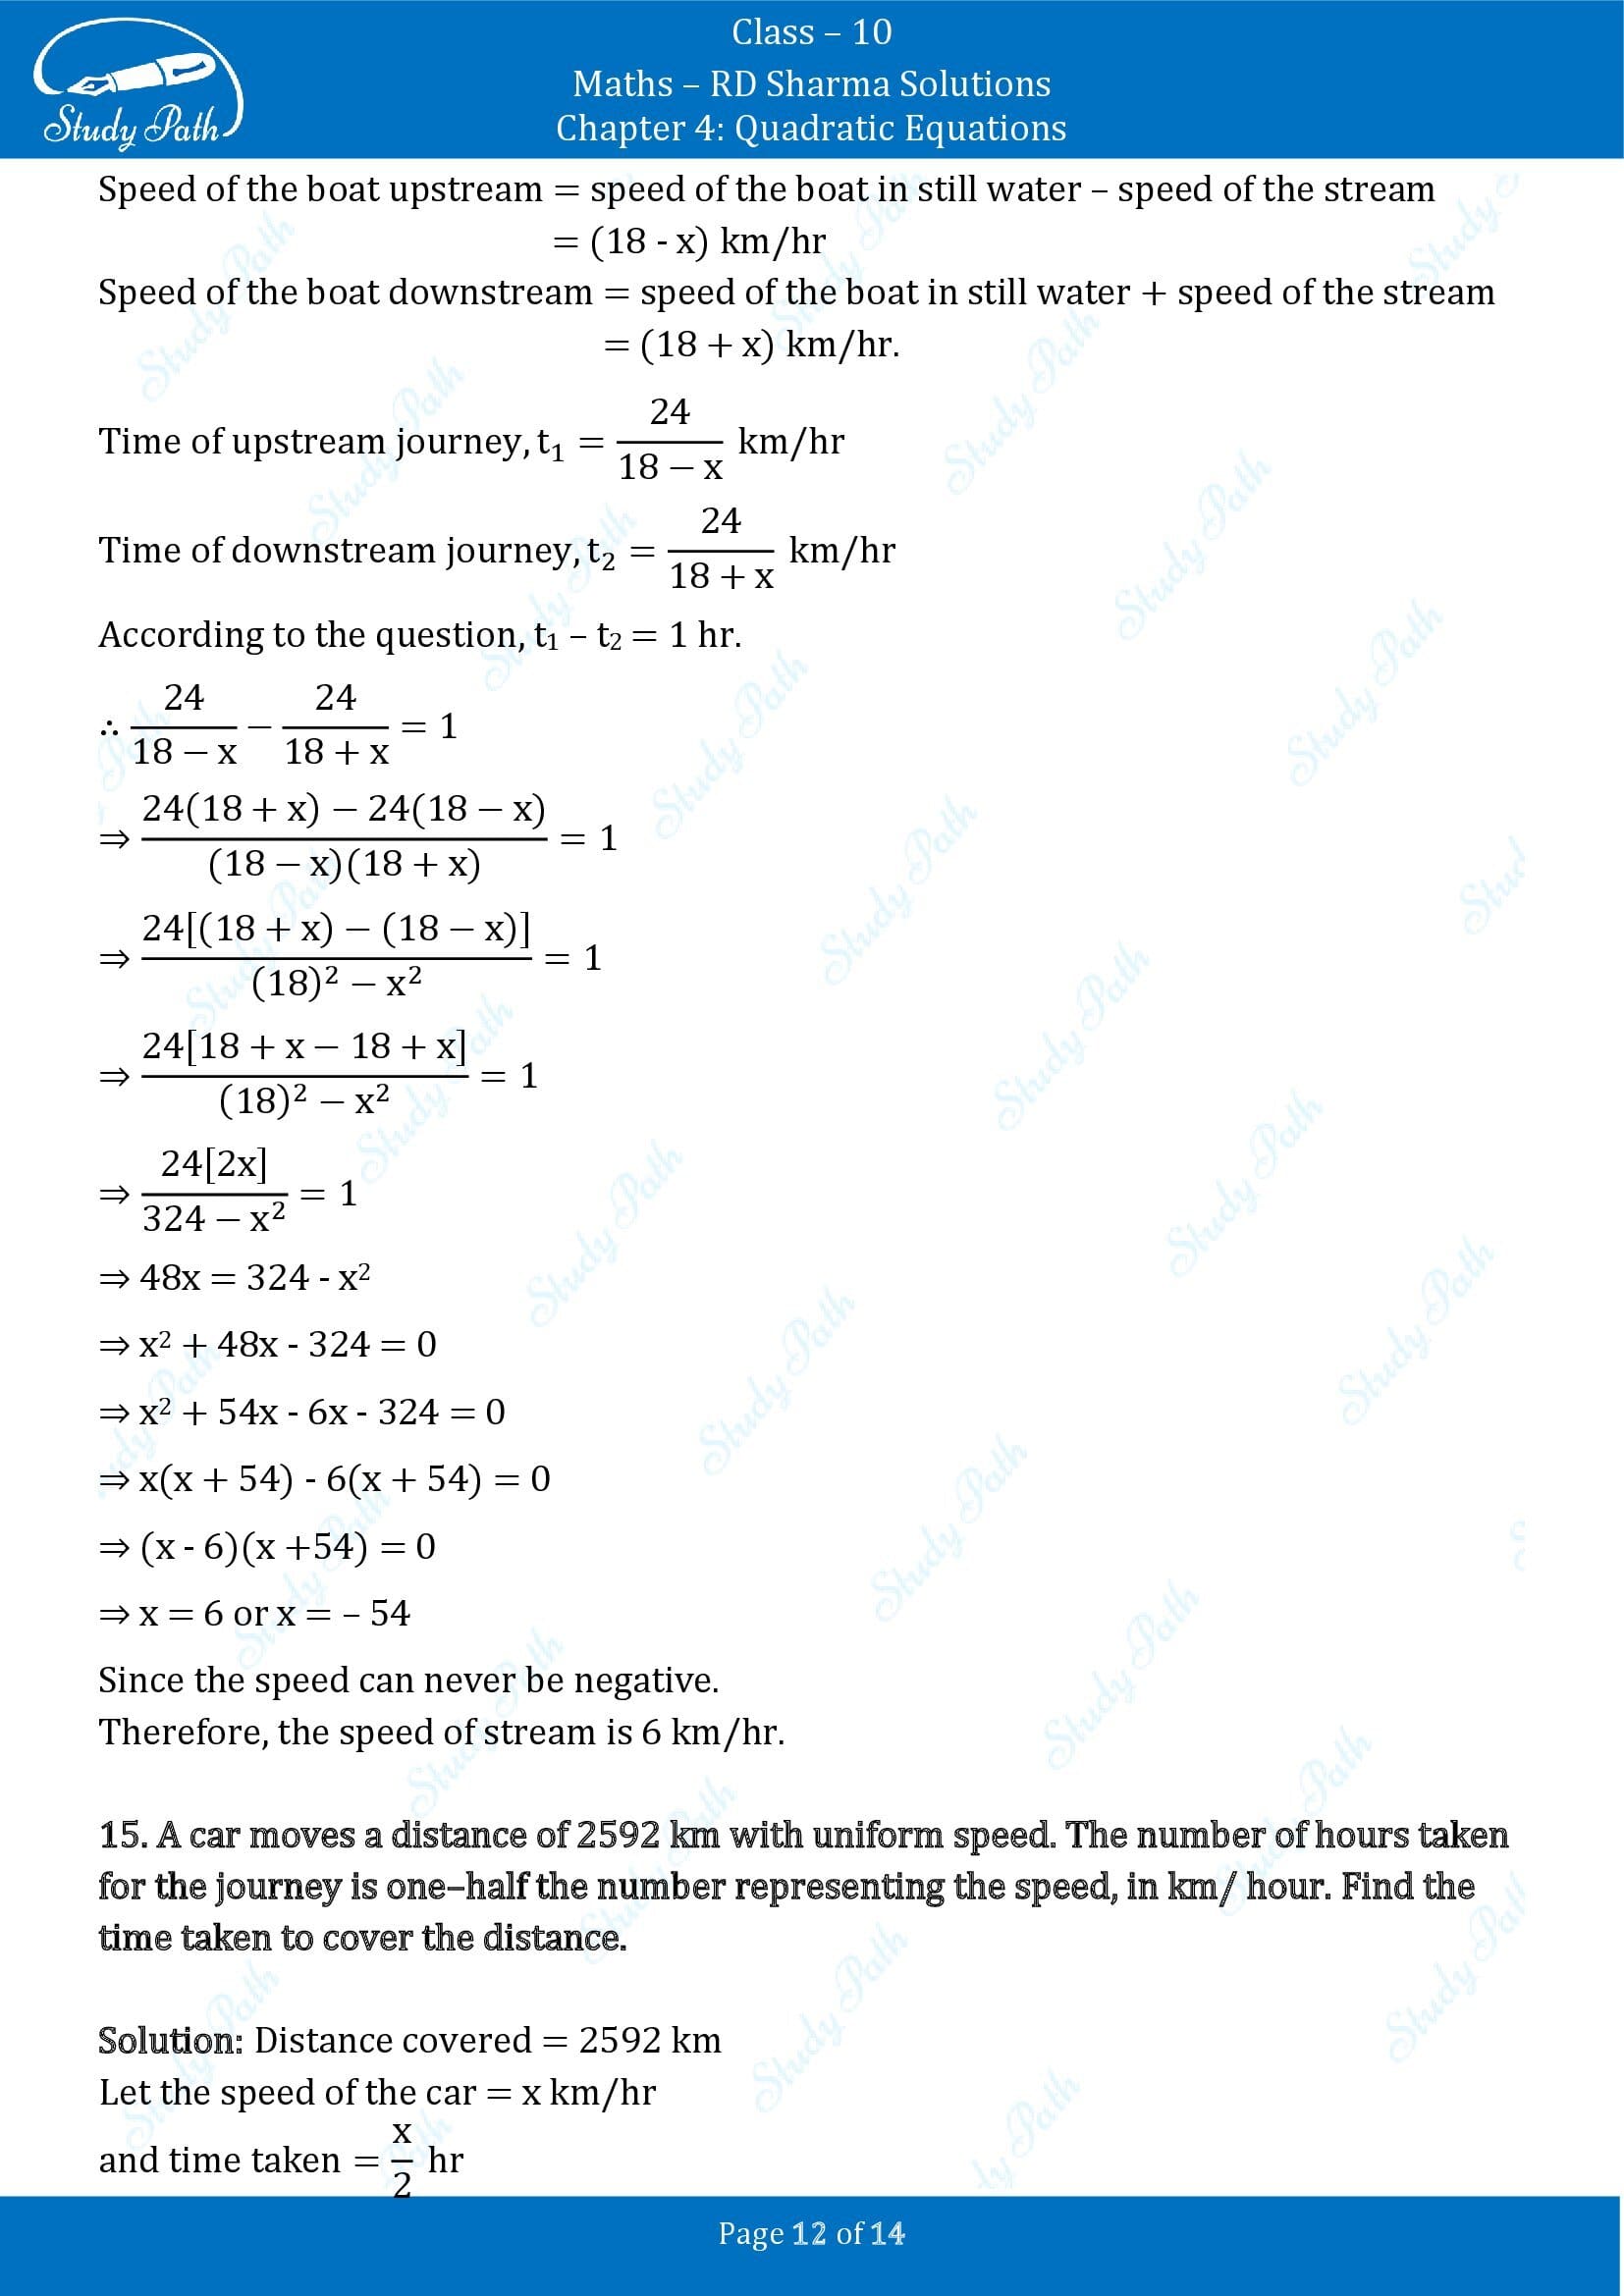 RD Sharma Solutions Class 10 Chapter 4 Quadratic Equations Exercise 4.8 00012